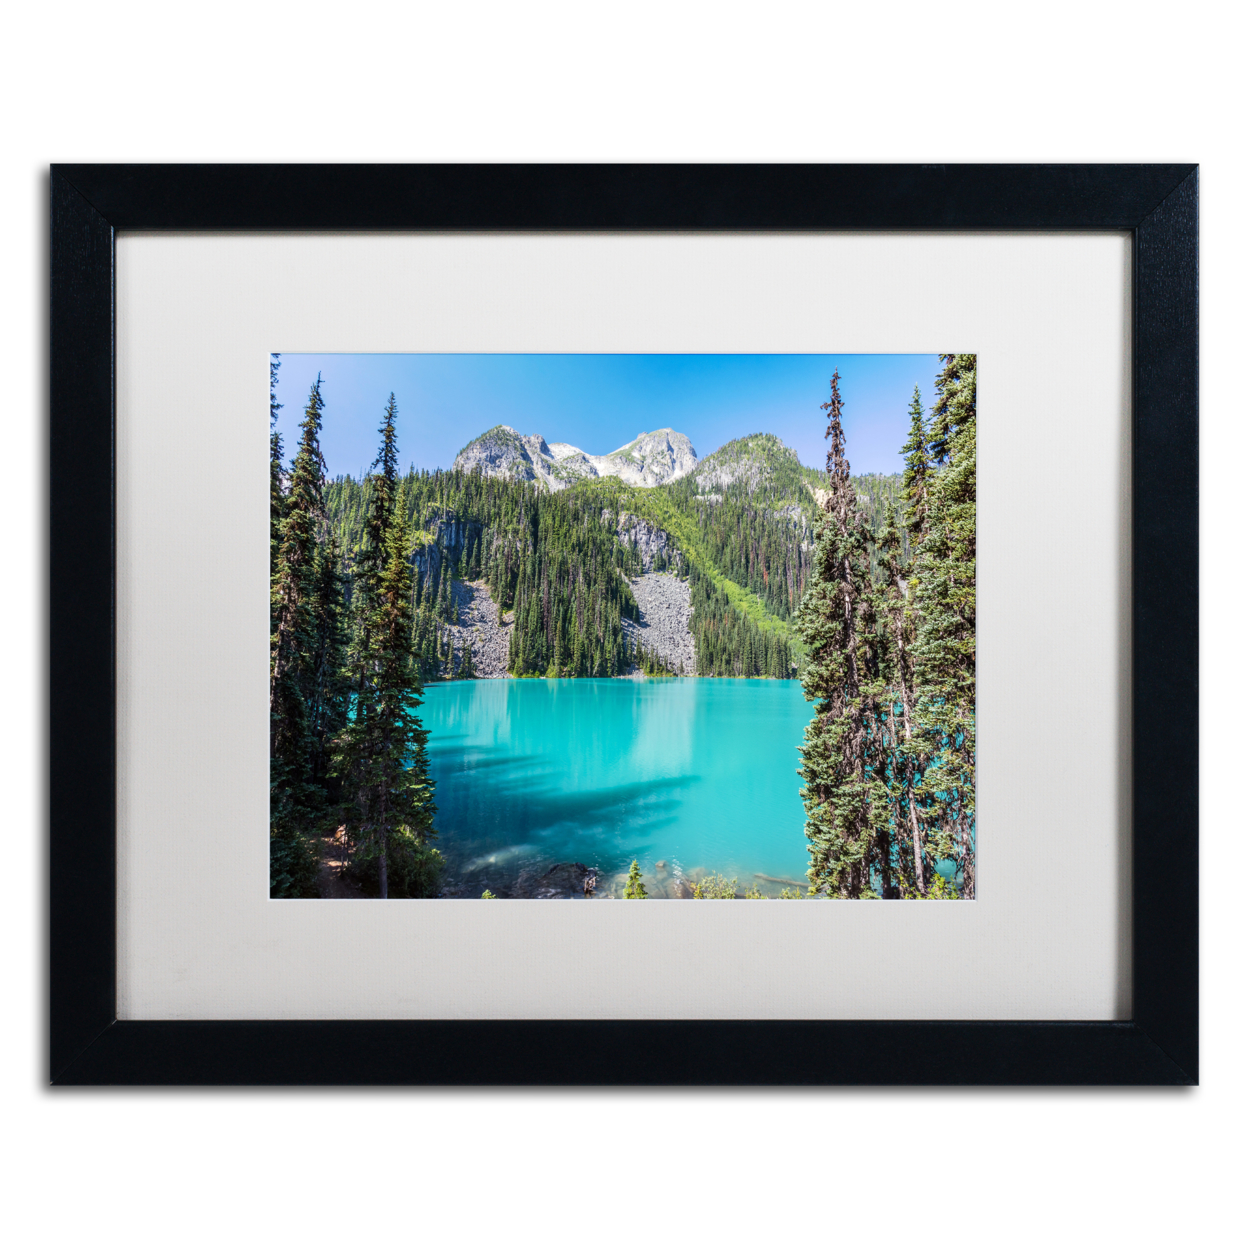 Pierre Leclerc 'Turquoise Lake' Black Wooden Framed Art 18 X 22 Inches